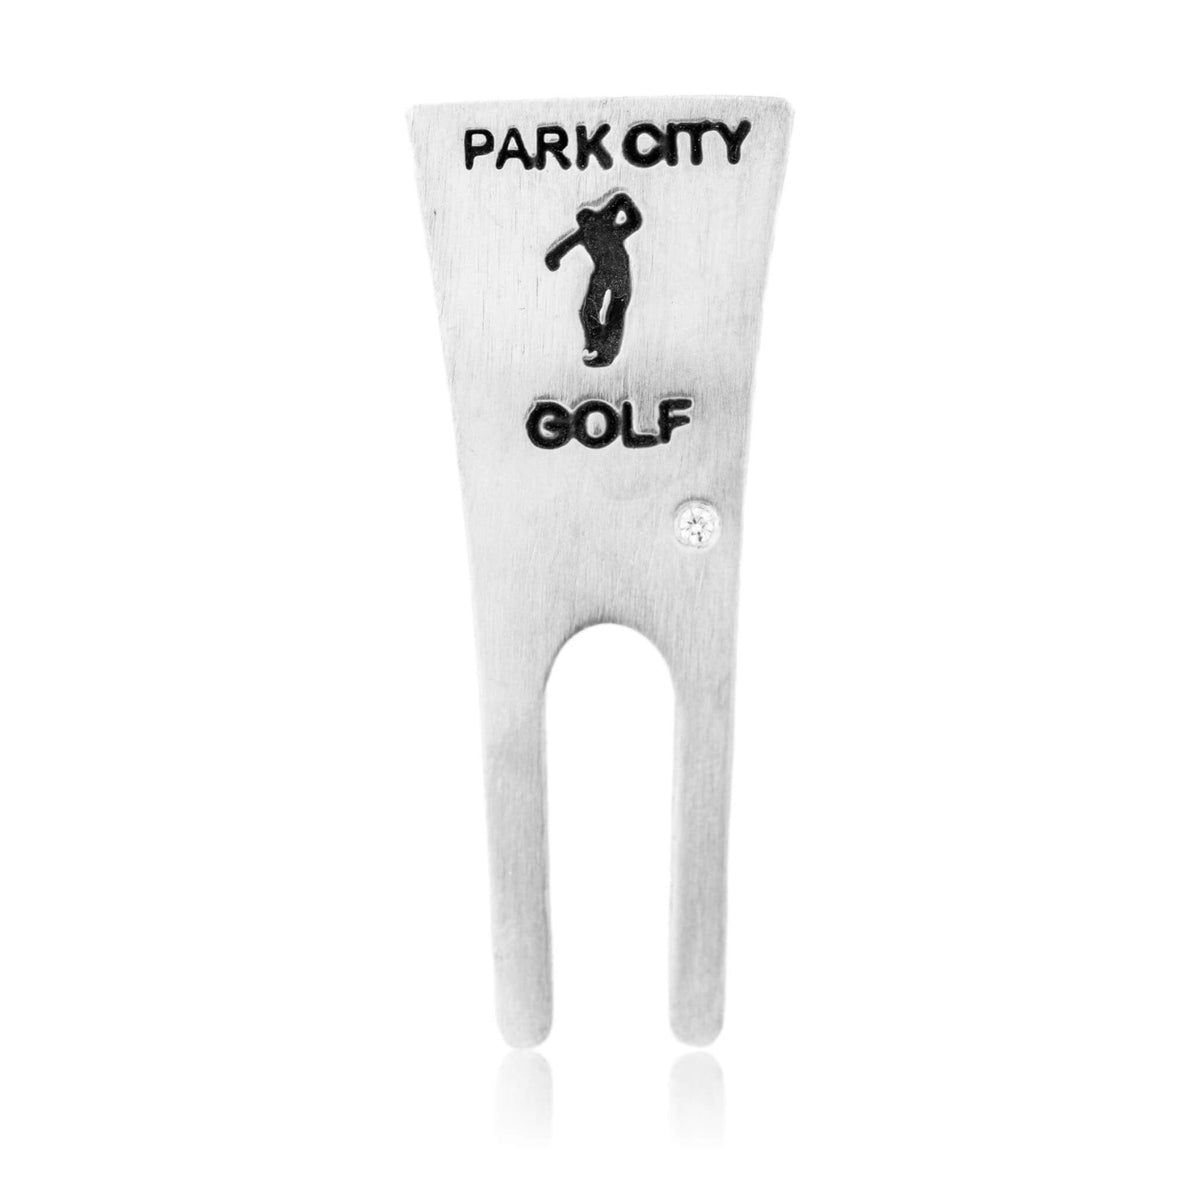 Park City Golf Divot Tool in Sterling Silver - Park City Jewelers